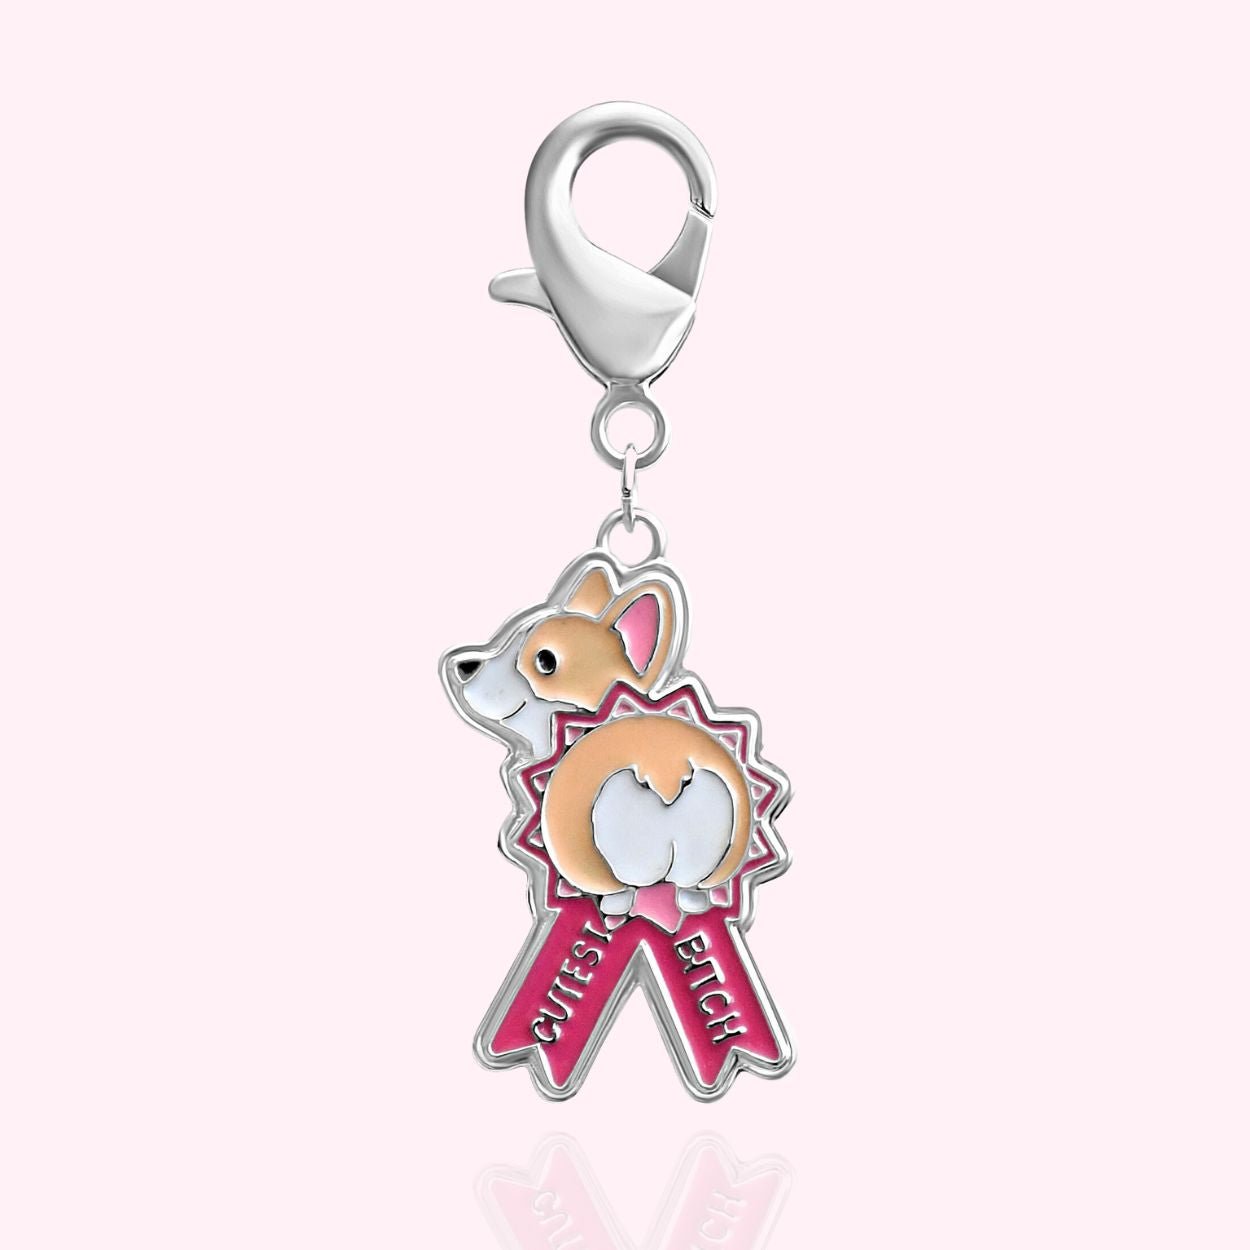 "Cutest Bitch" Dog Collar Charm - Silver - Doggy Style Pet Products